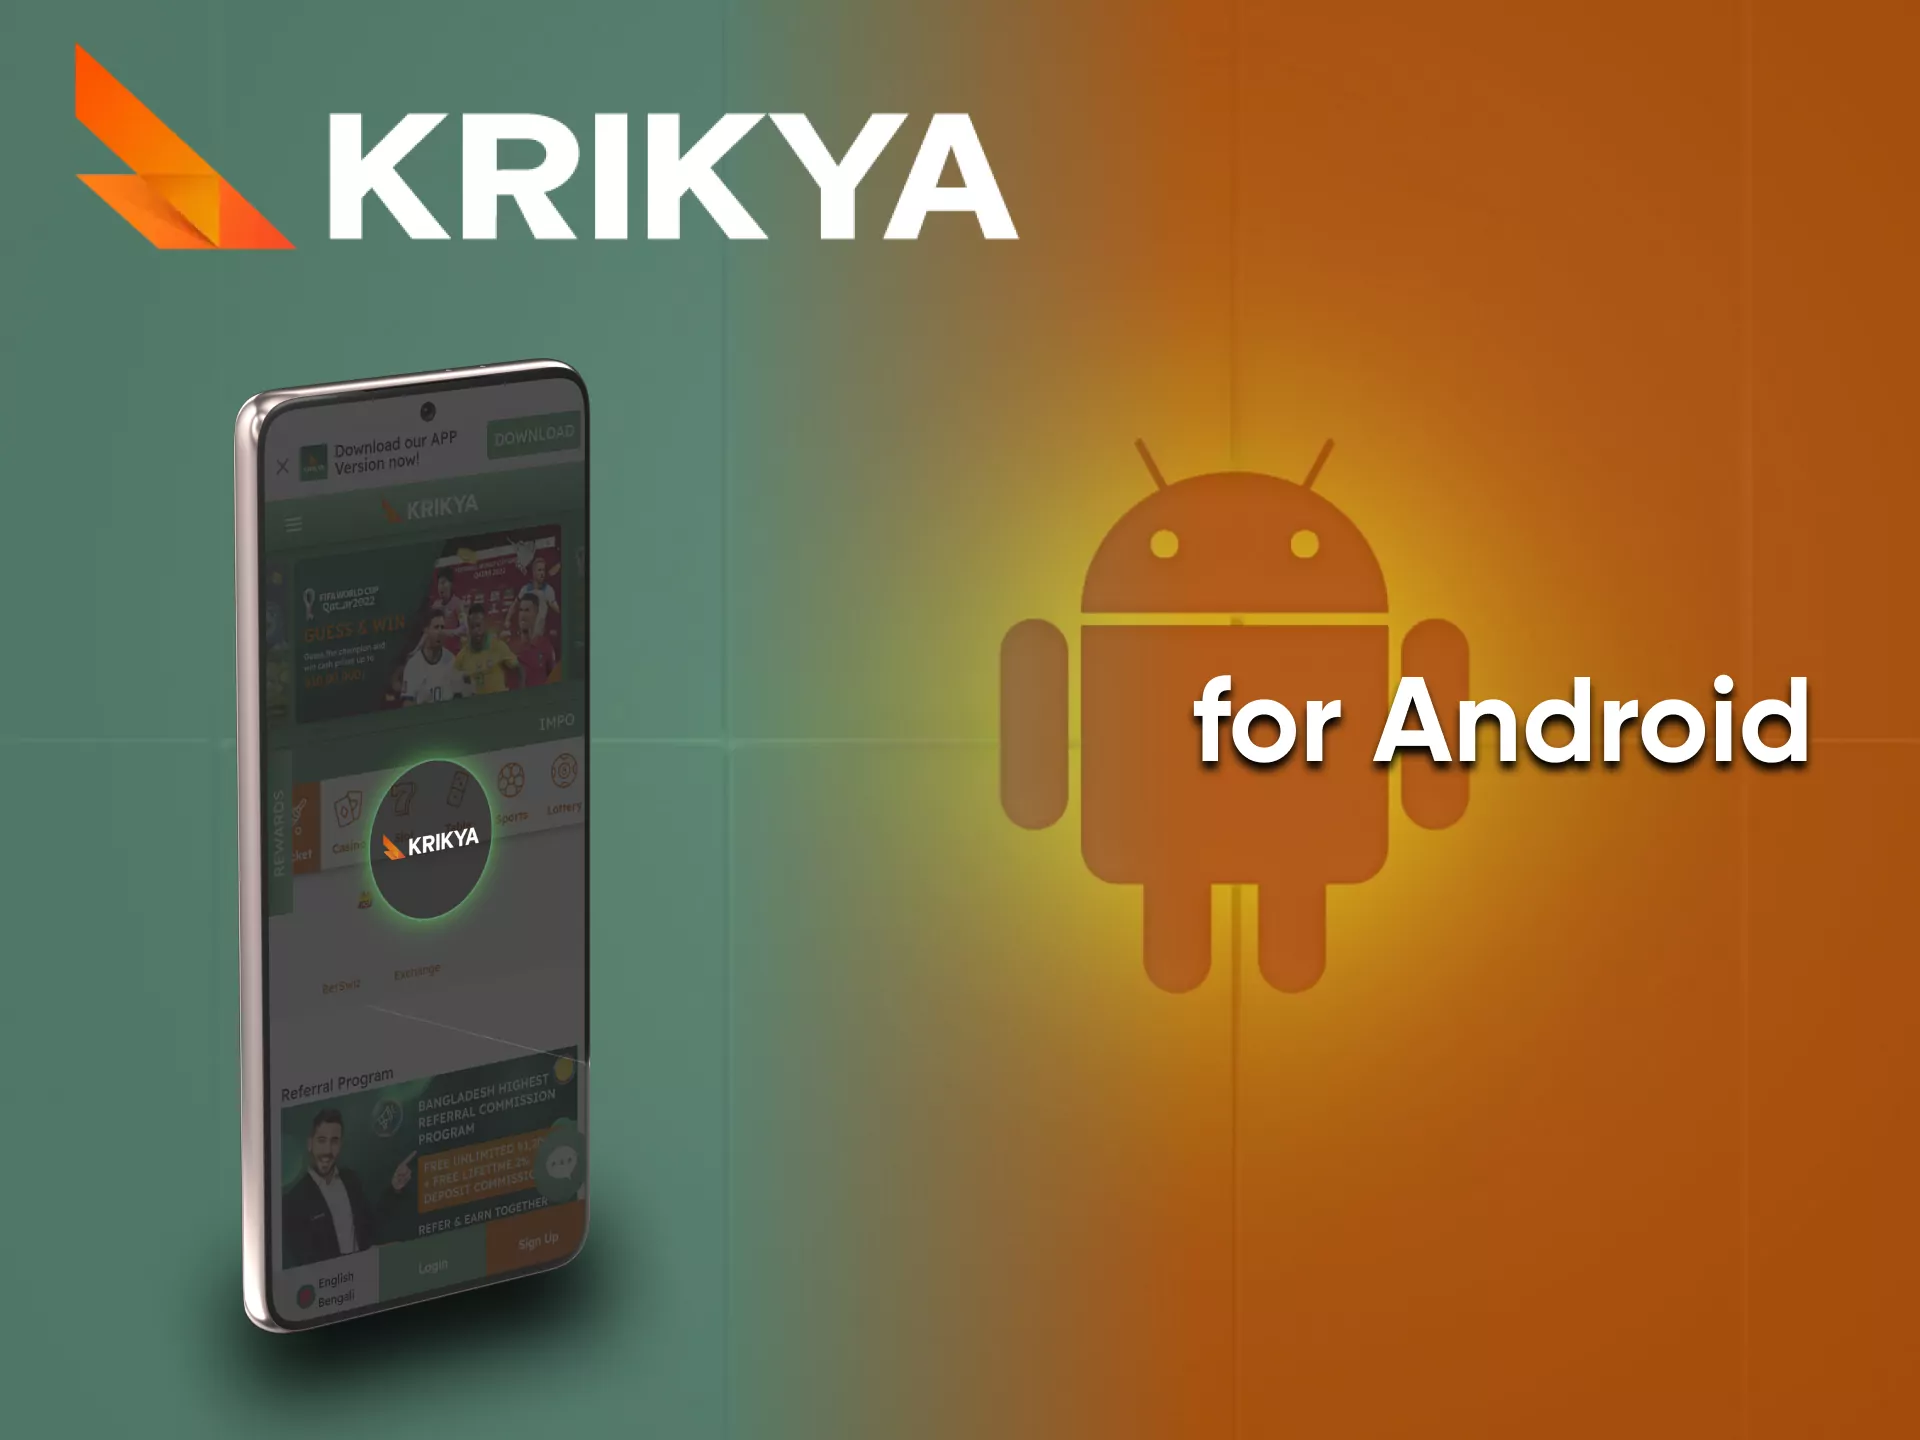 To play at the casino, download the Krikya app.